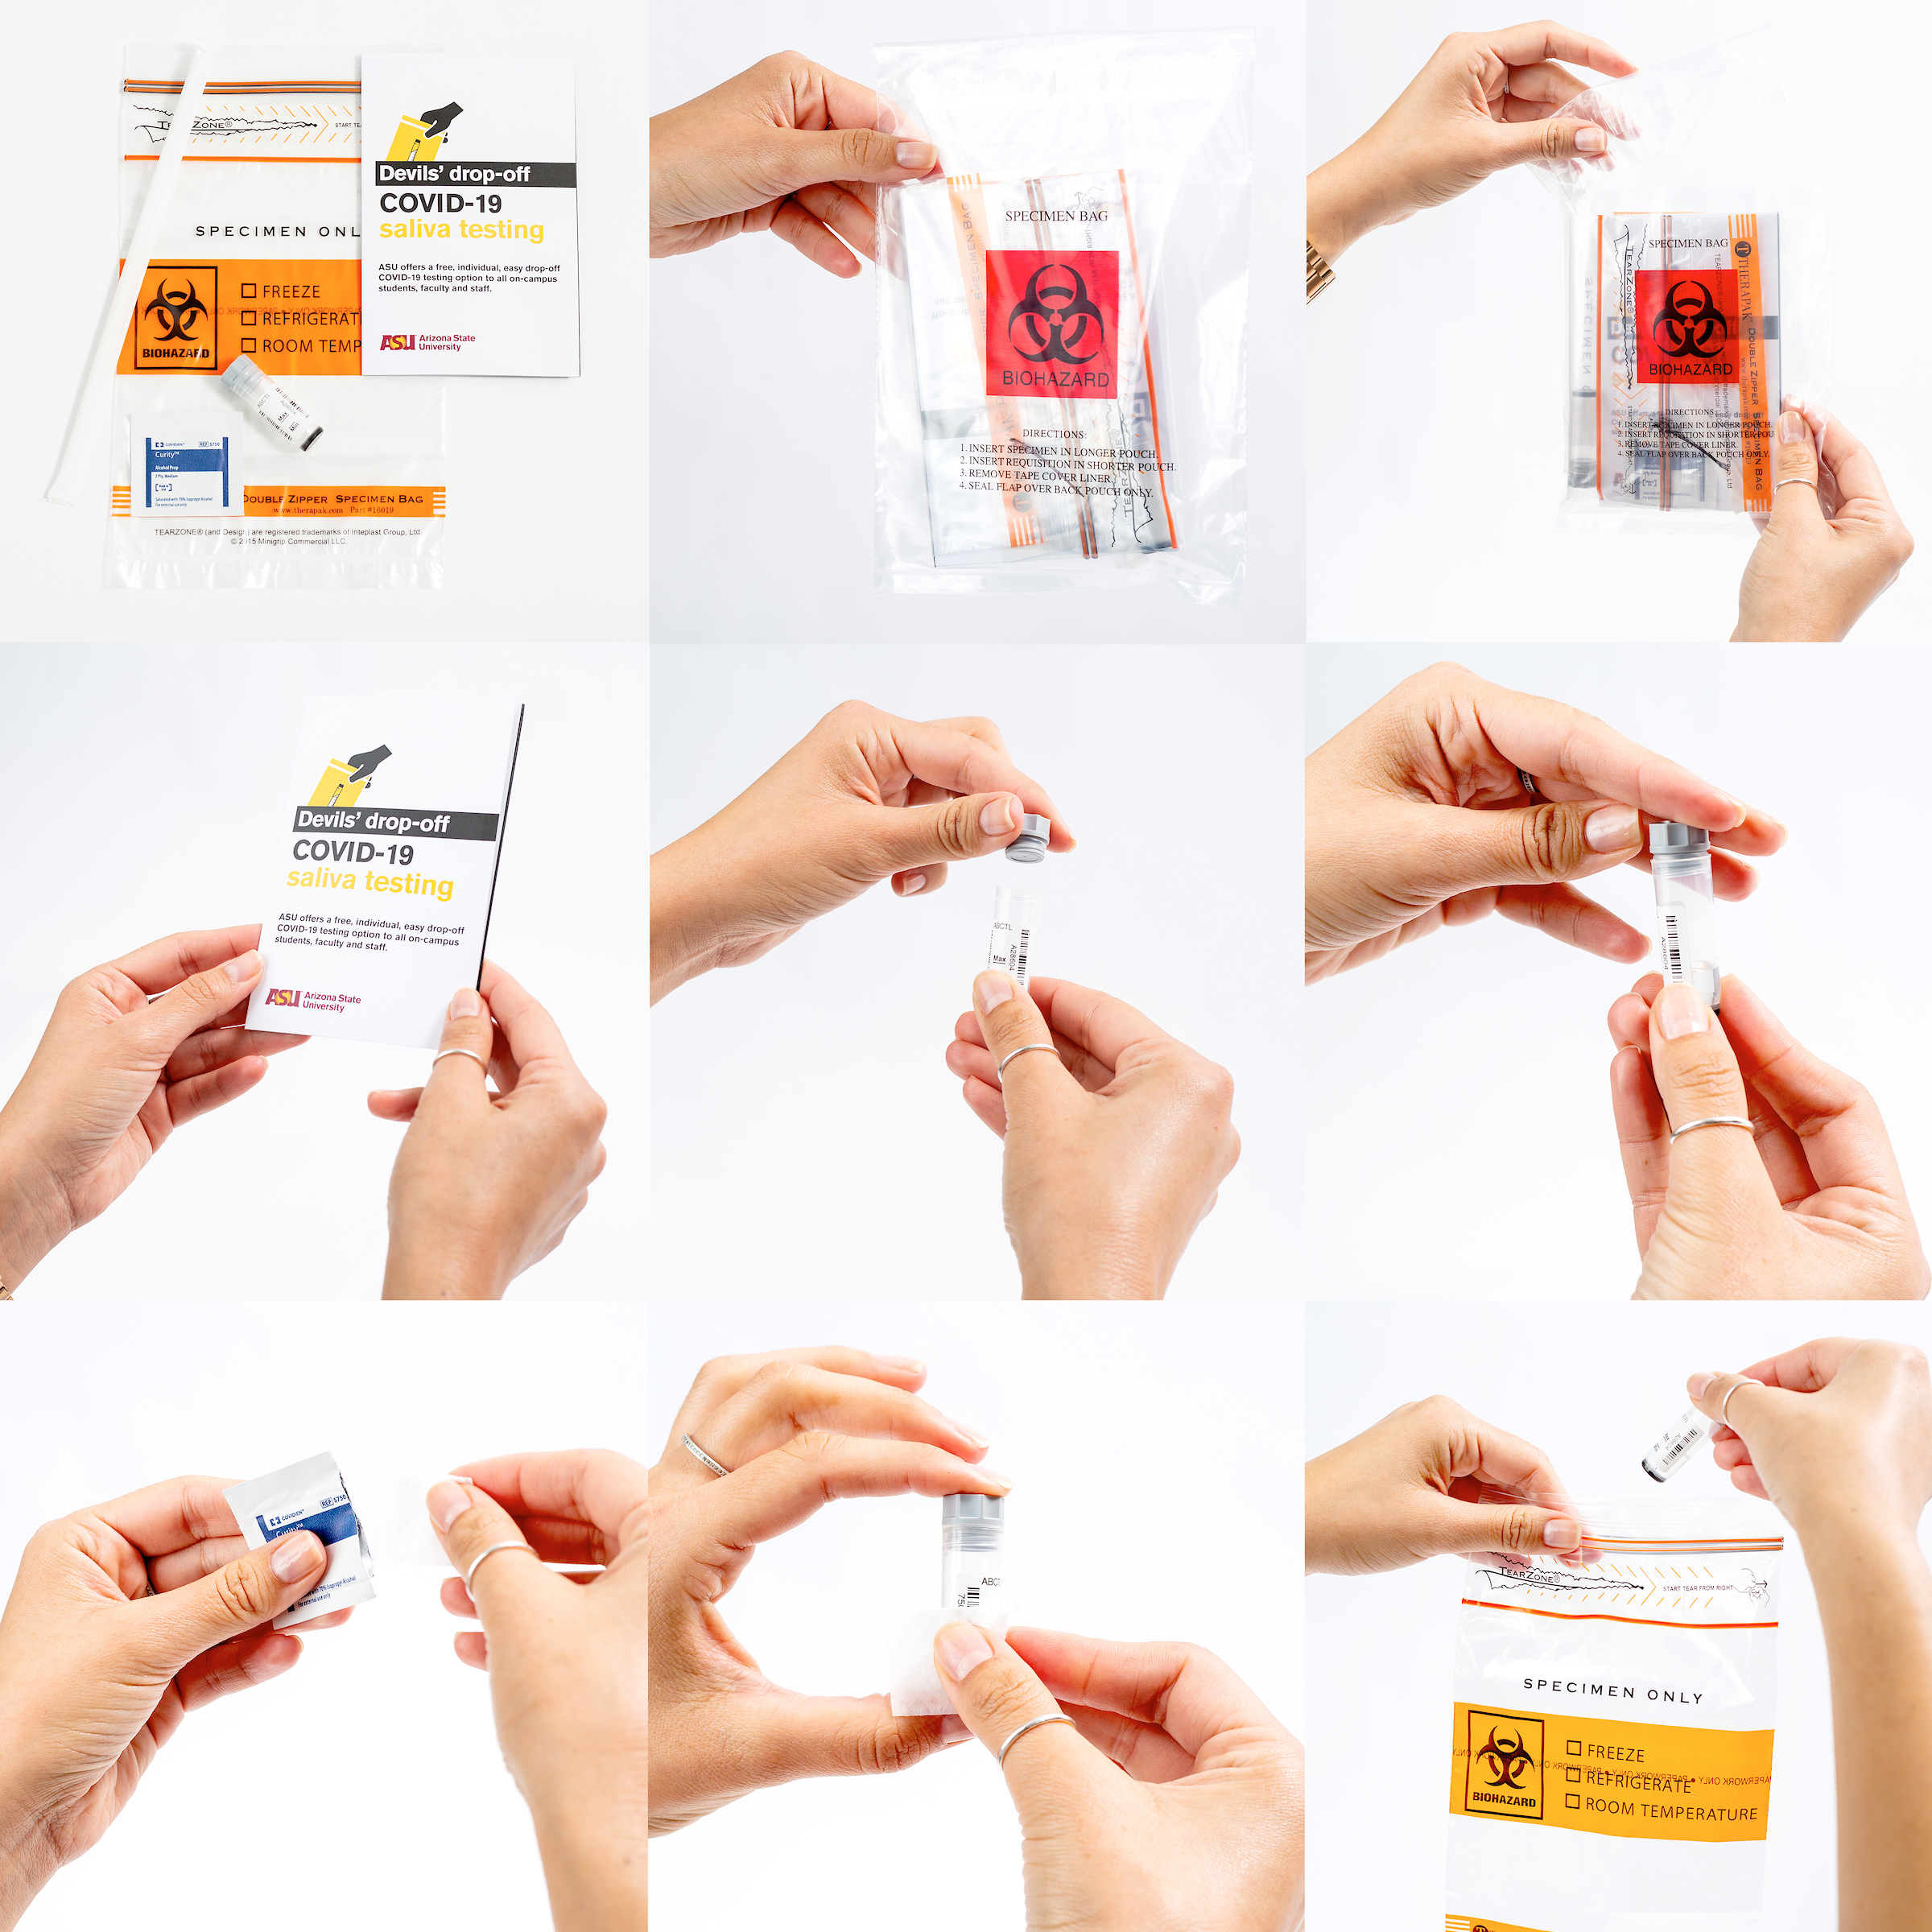 A photo collage showing the steps involved in using a COVID saliva test kit